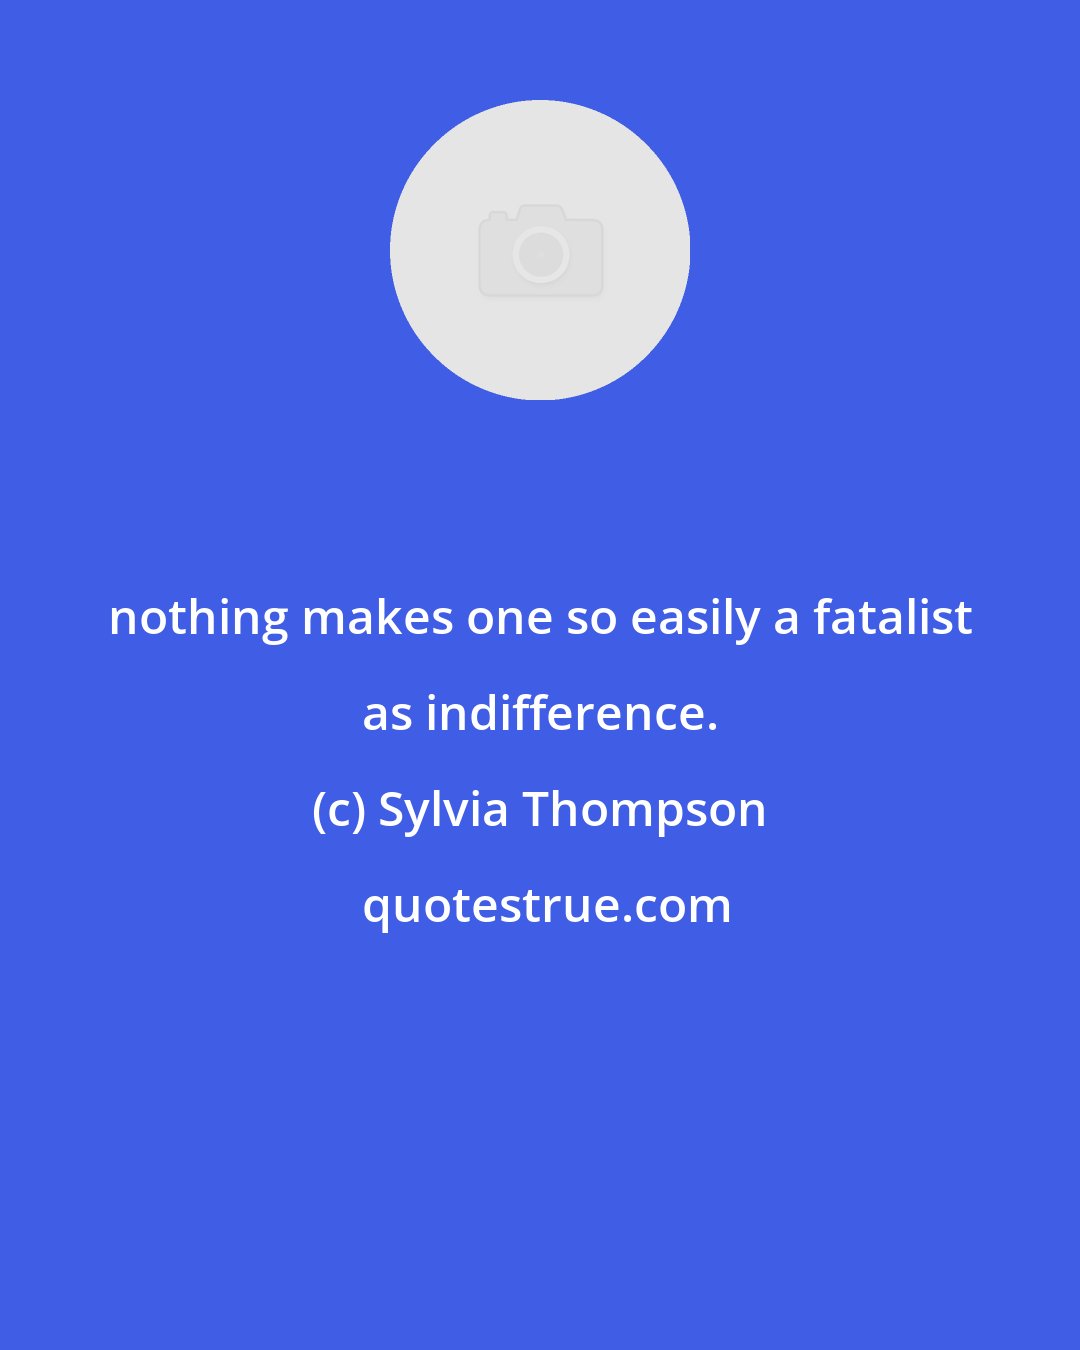 Sylvia Thompson: nothing makes one so easily a fatalist as indifference.